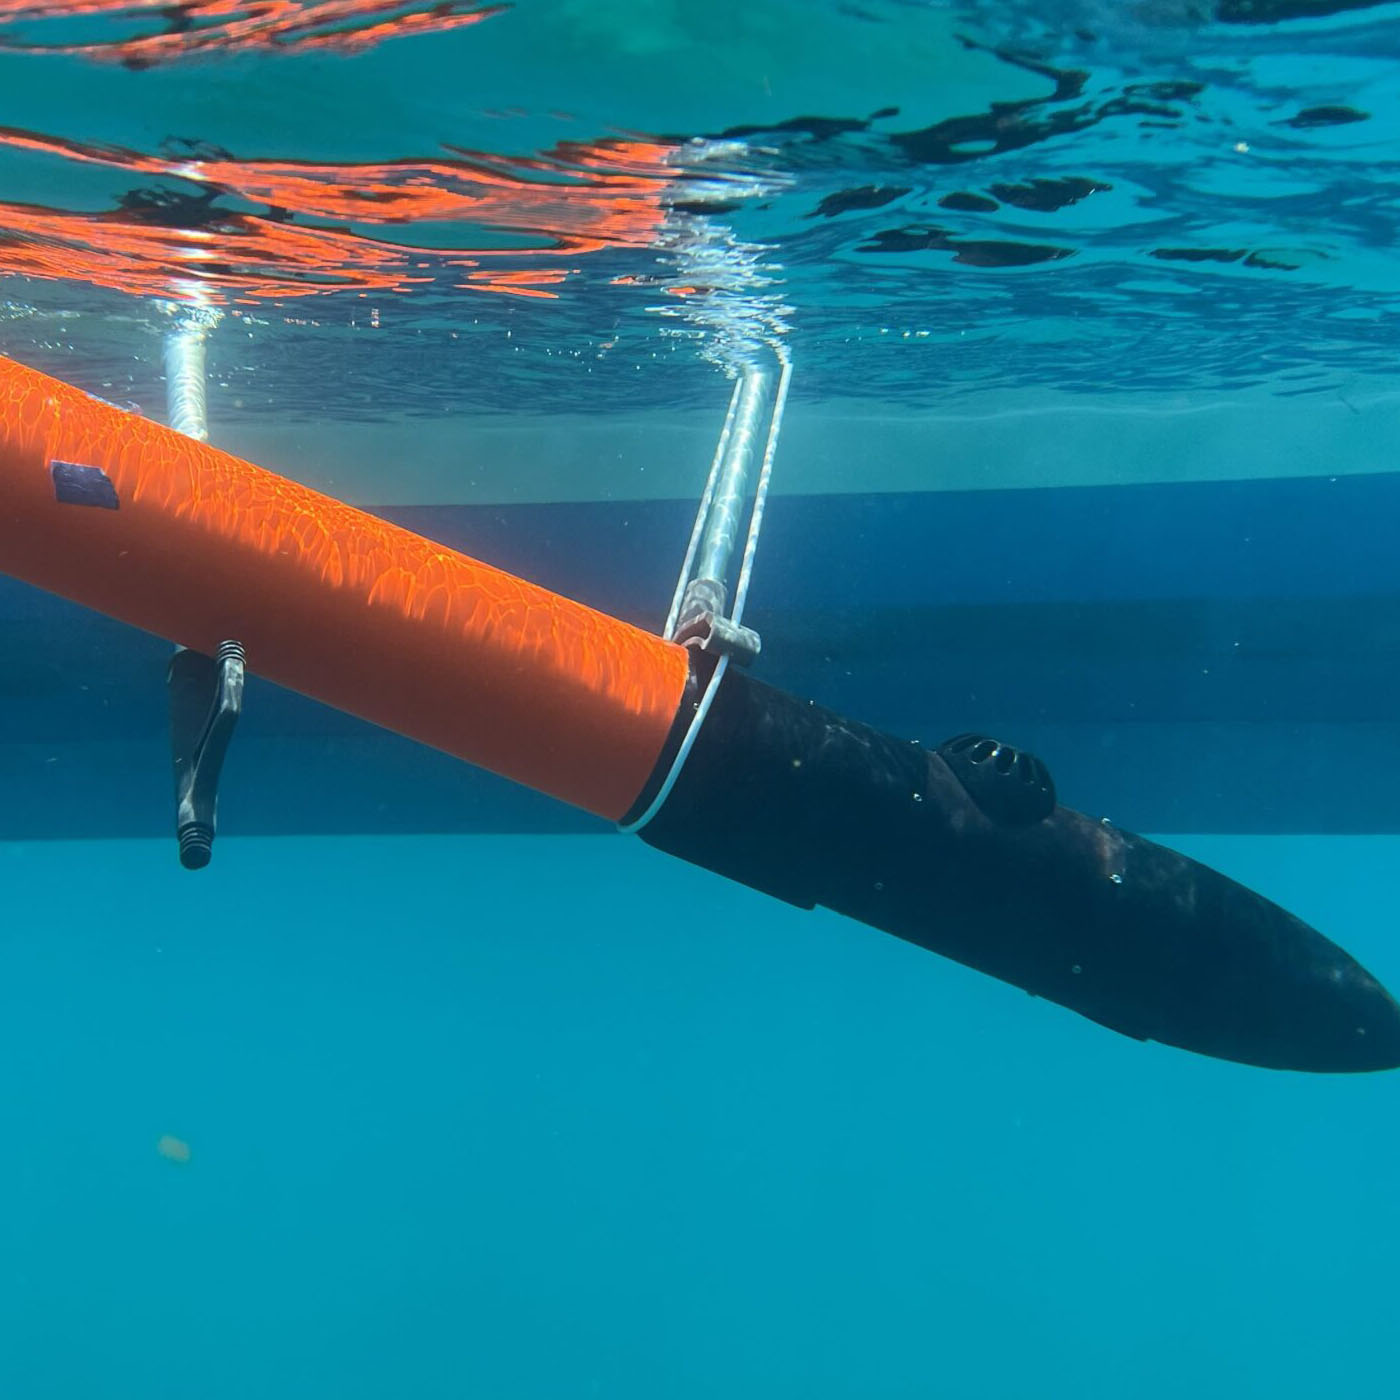 And underwater view of a black and orange torpedo like object being lowered into the water.